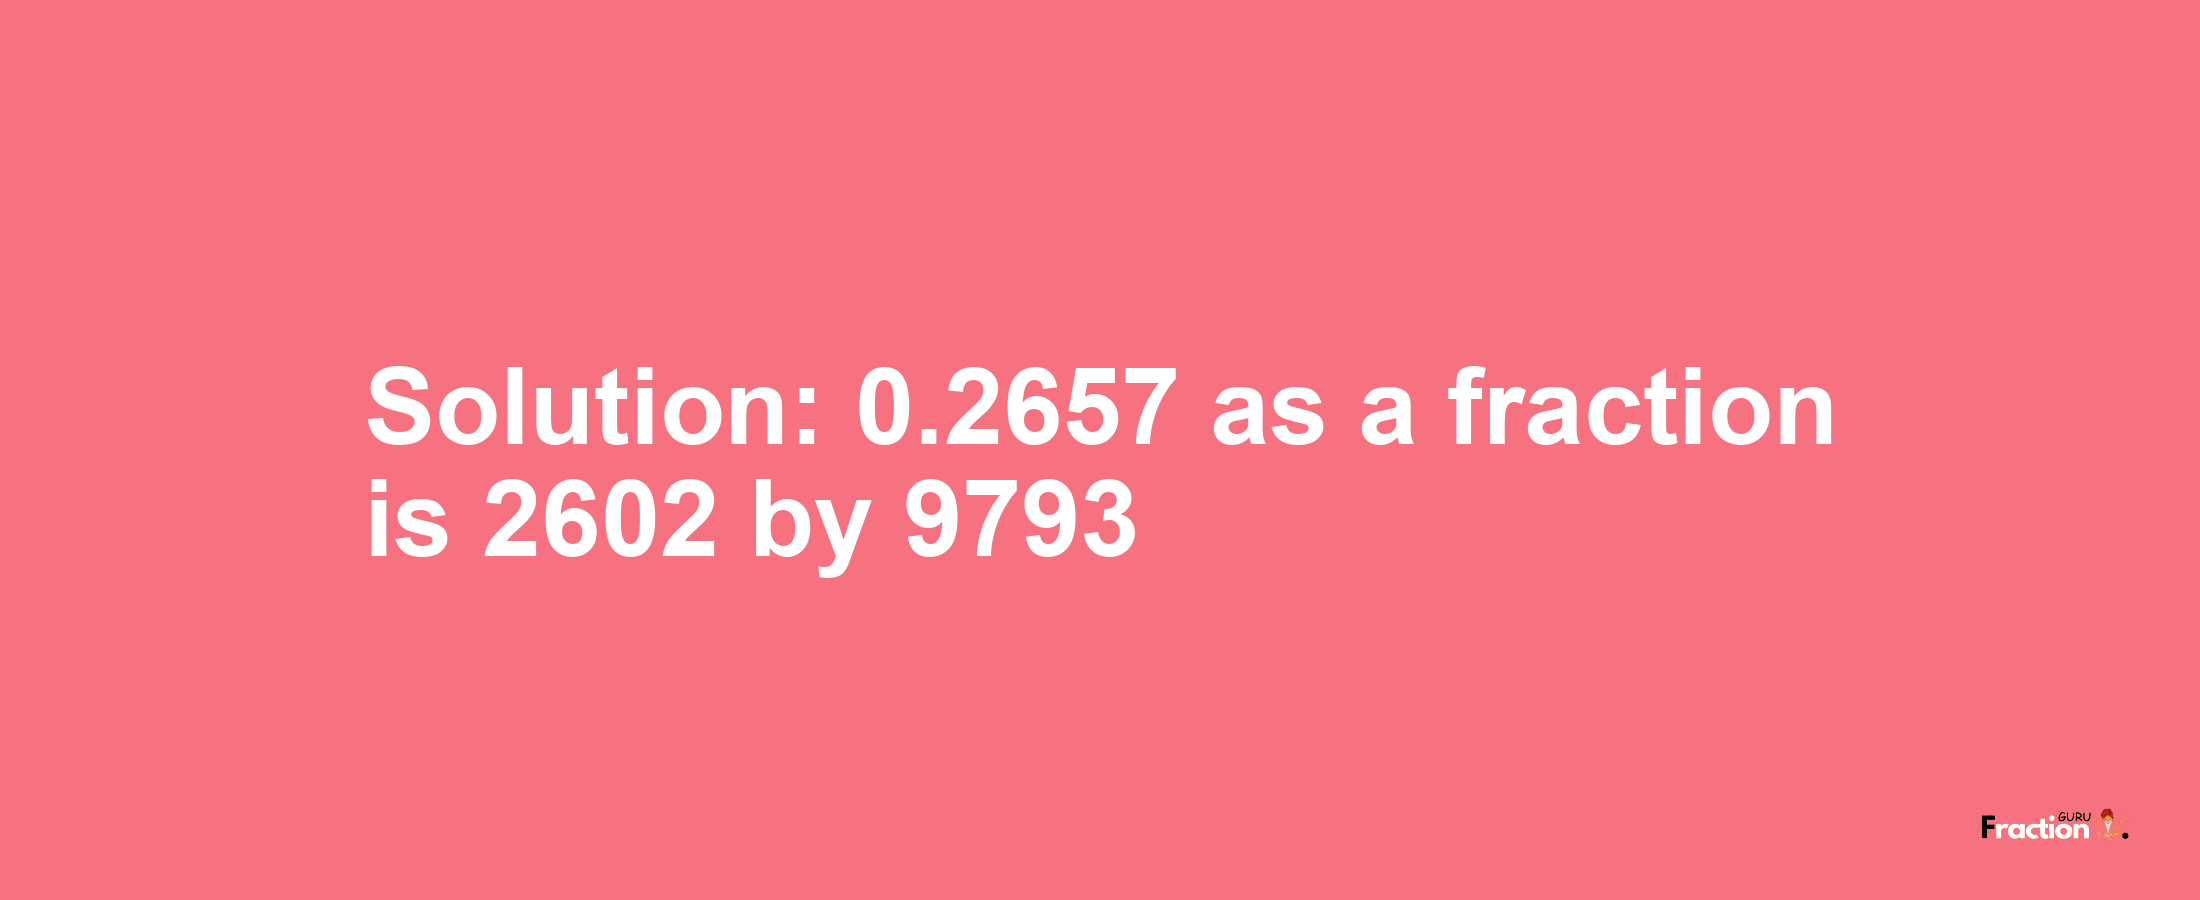 Solution:0.2657 as a fraction is 2602/9793